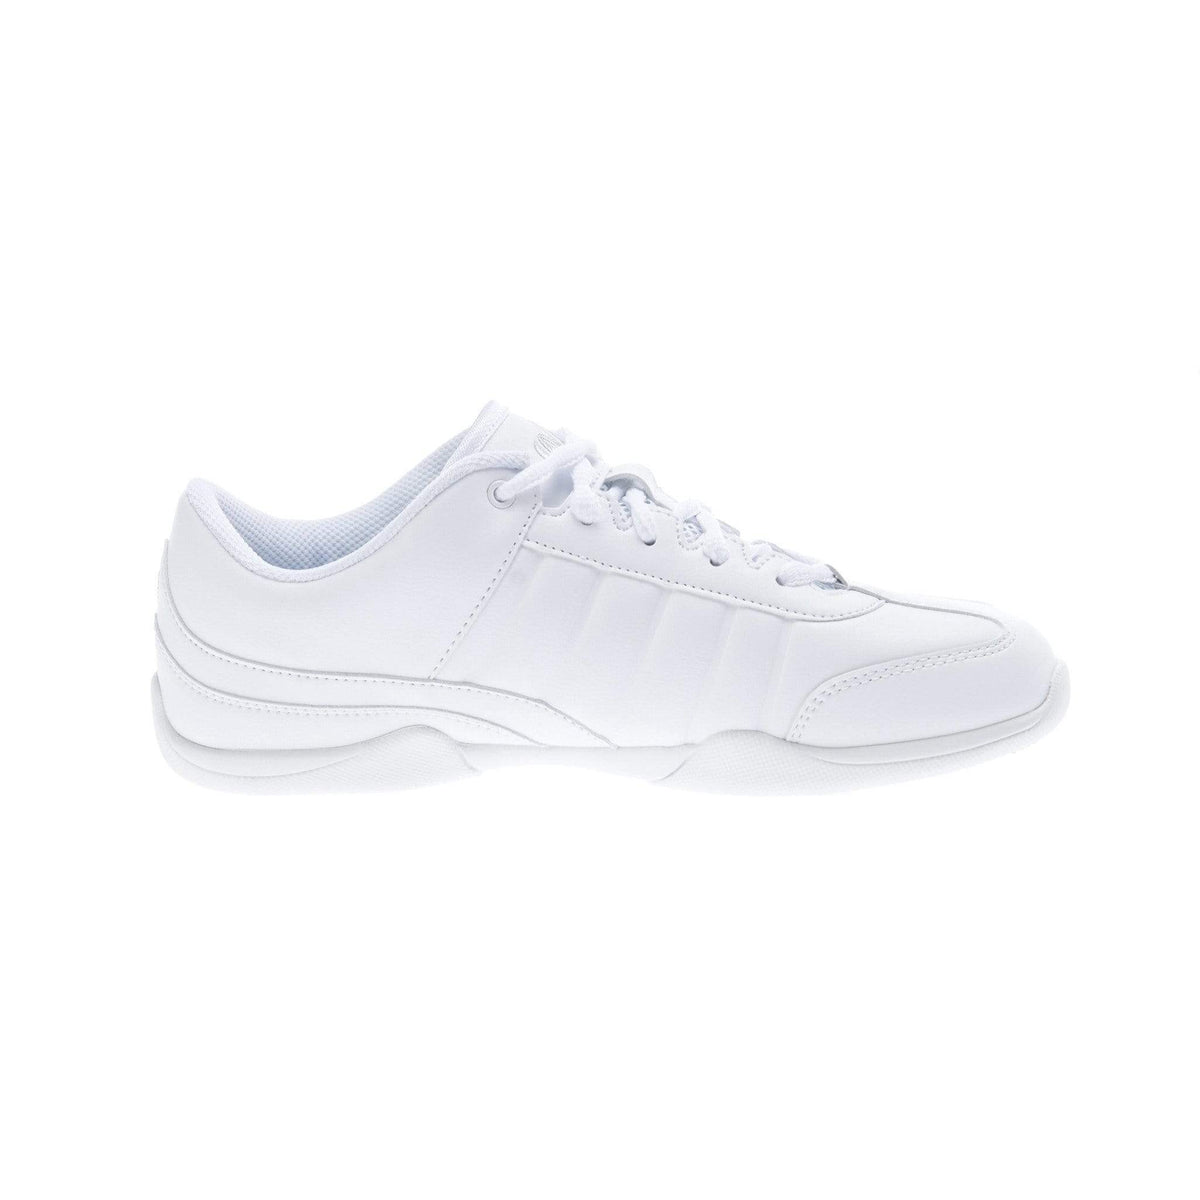 white cheer shoes youth